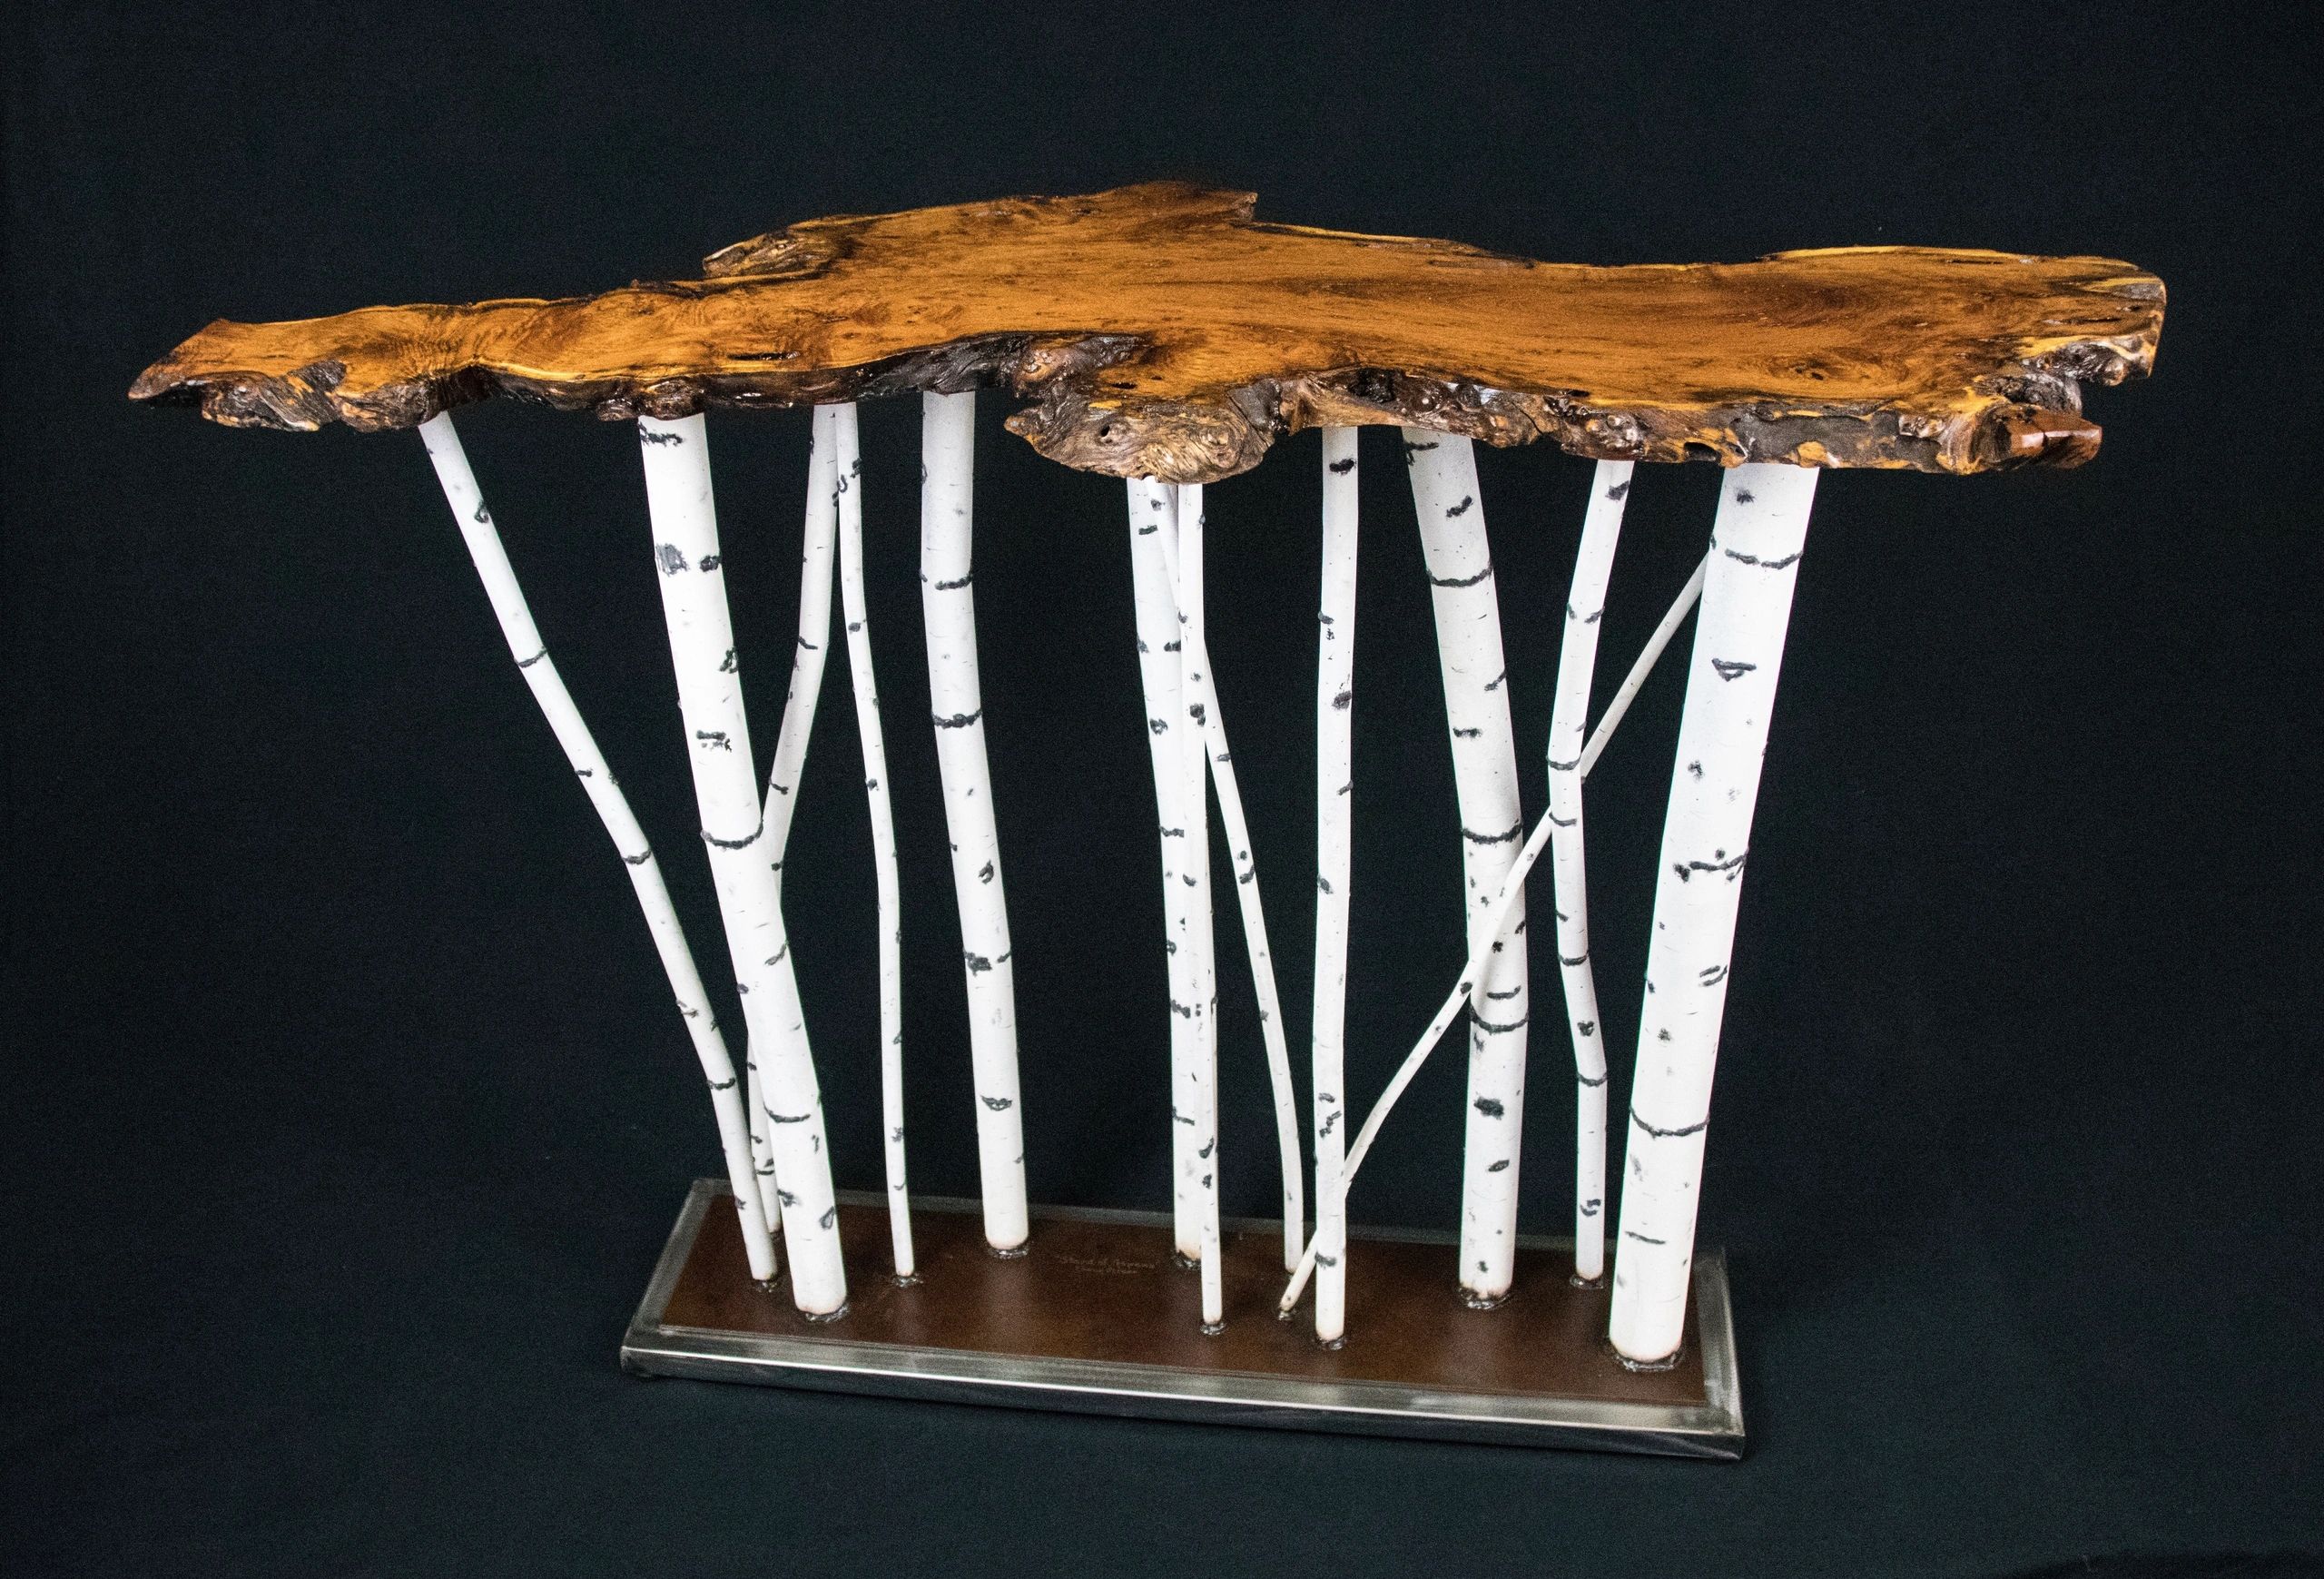 Mesquite top with Aspen tree base